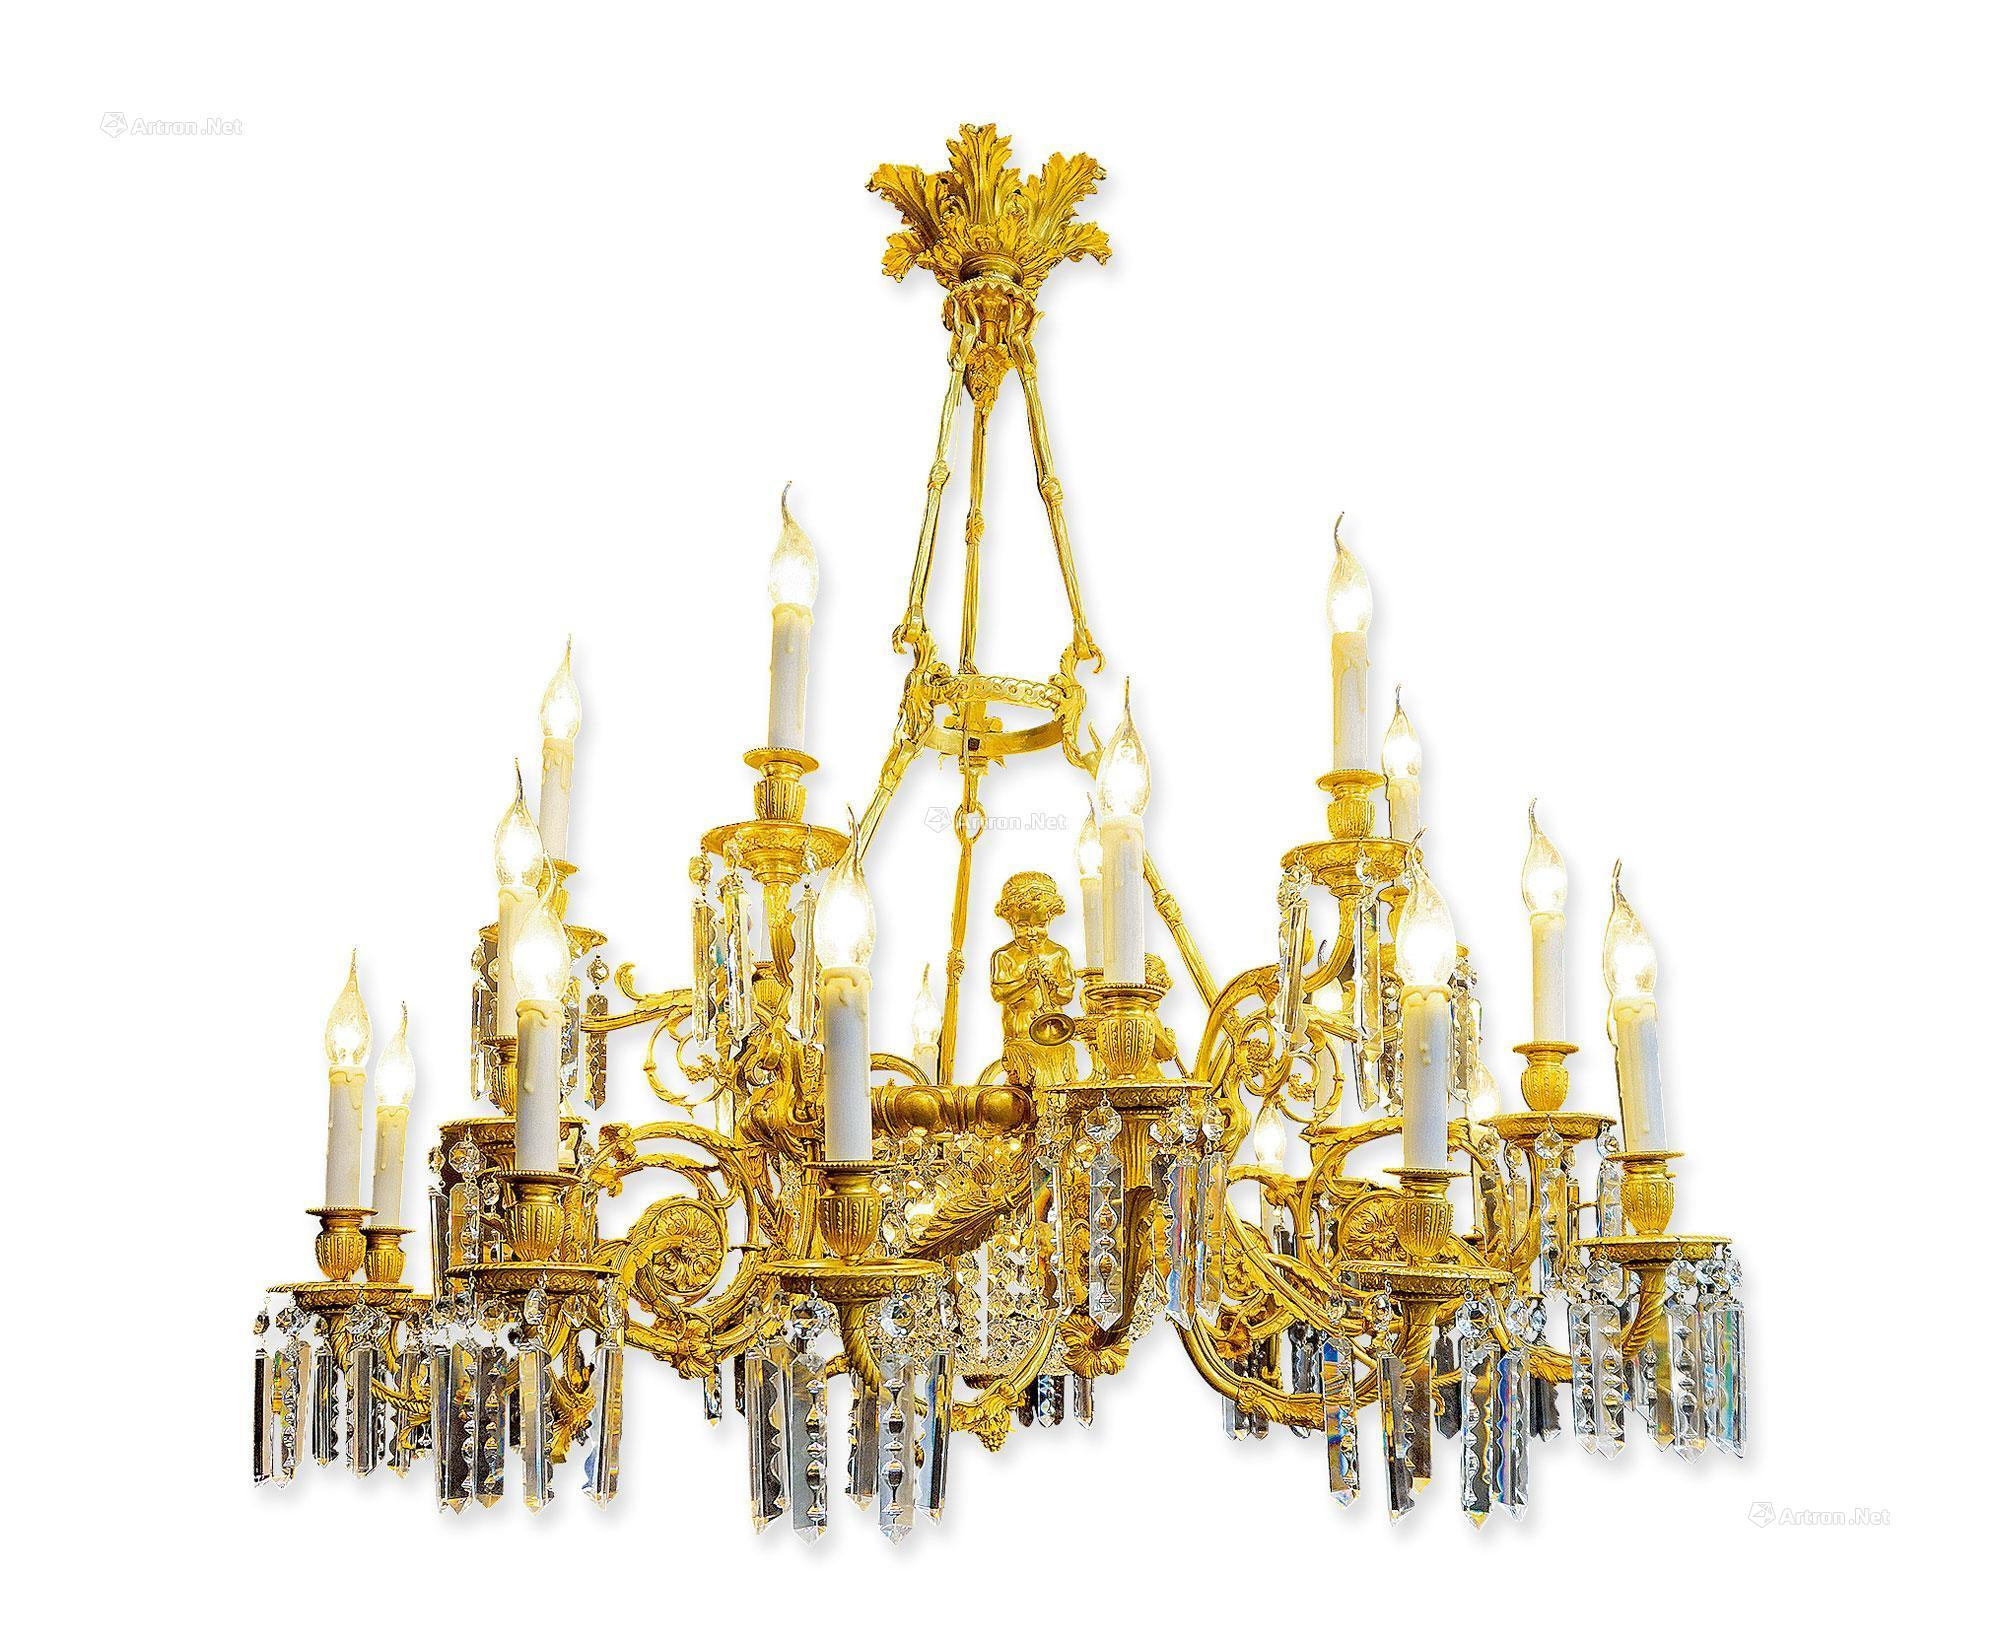 A PAIR OF FRENCH LOUIS XVI STYLE GILT BRONZE AND CRYSTAL GRAND CHANDELIER